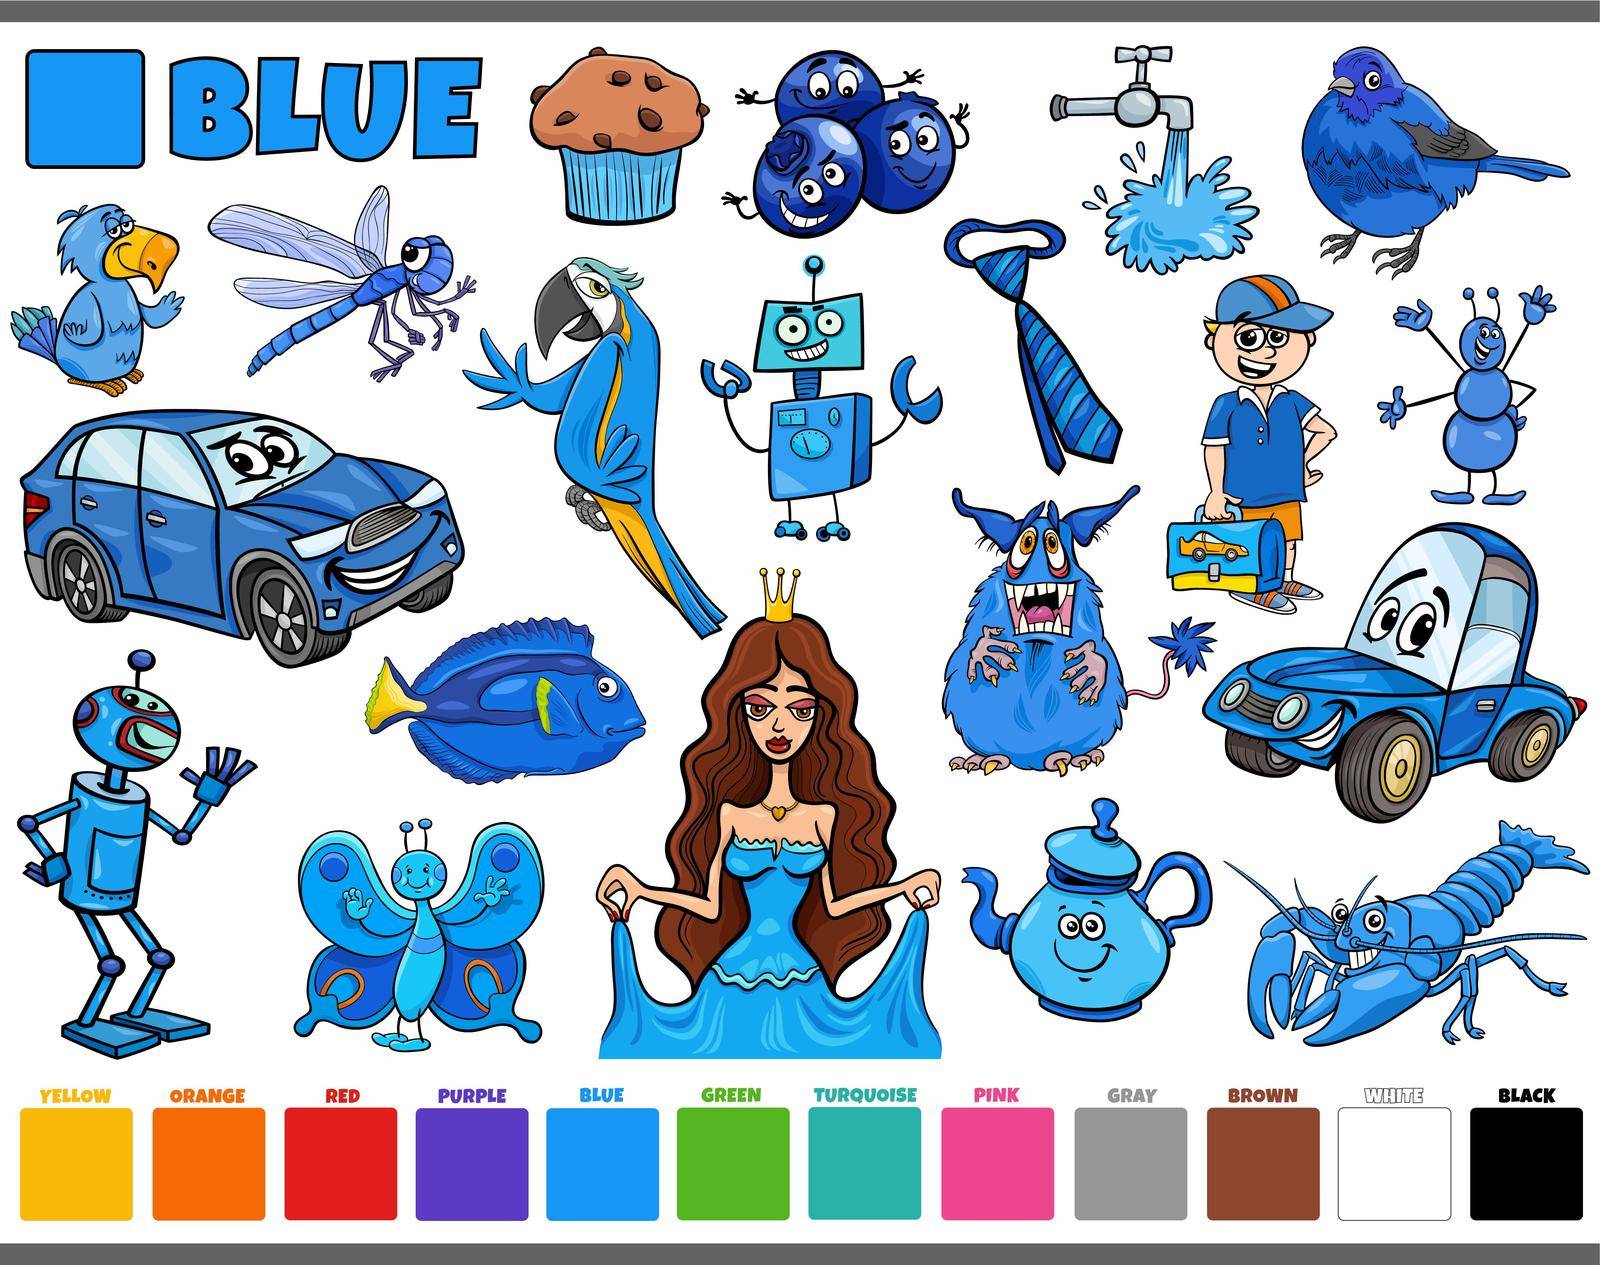 Cartoon illustration set with comic characters such as people and animals or objects in blue